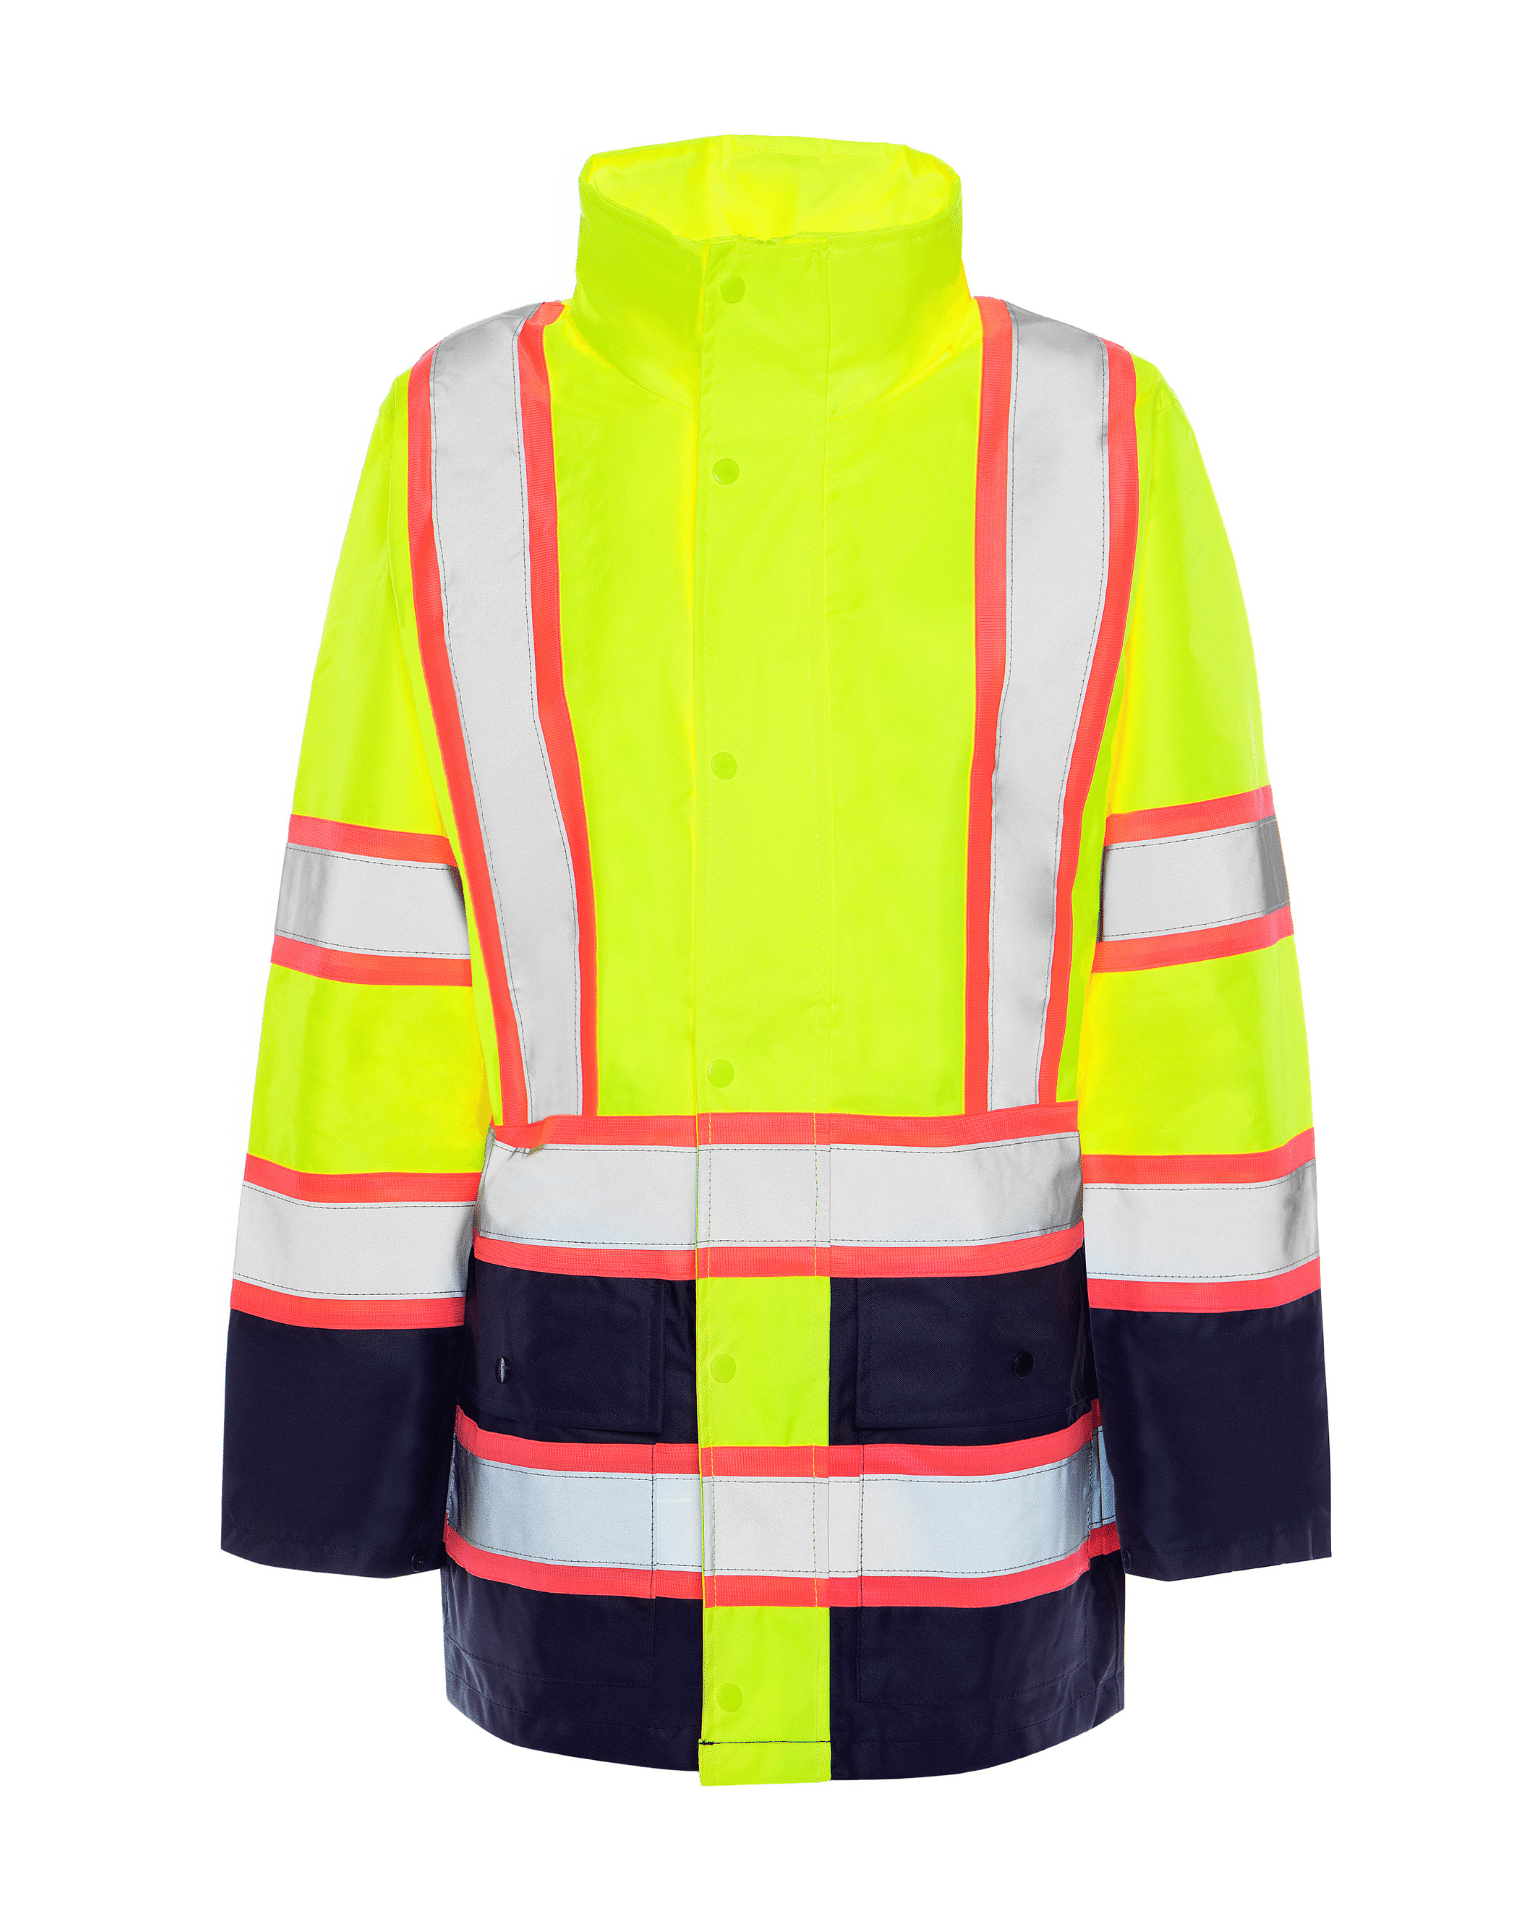 ANSI Class 2 High Visibility Women's pink trimmed reflective tape polyester shell with mesh lining rain jacket by Utility Pro